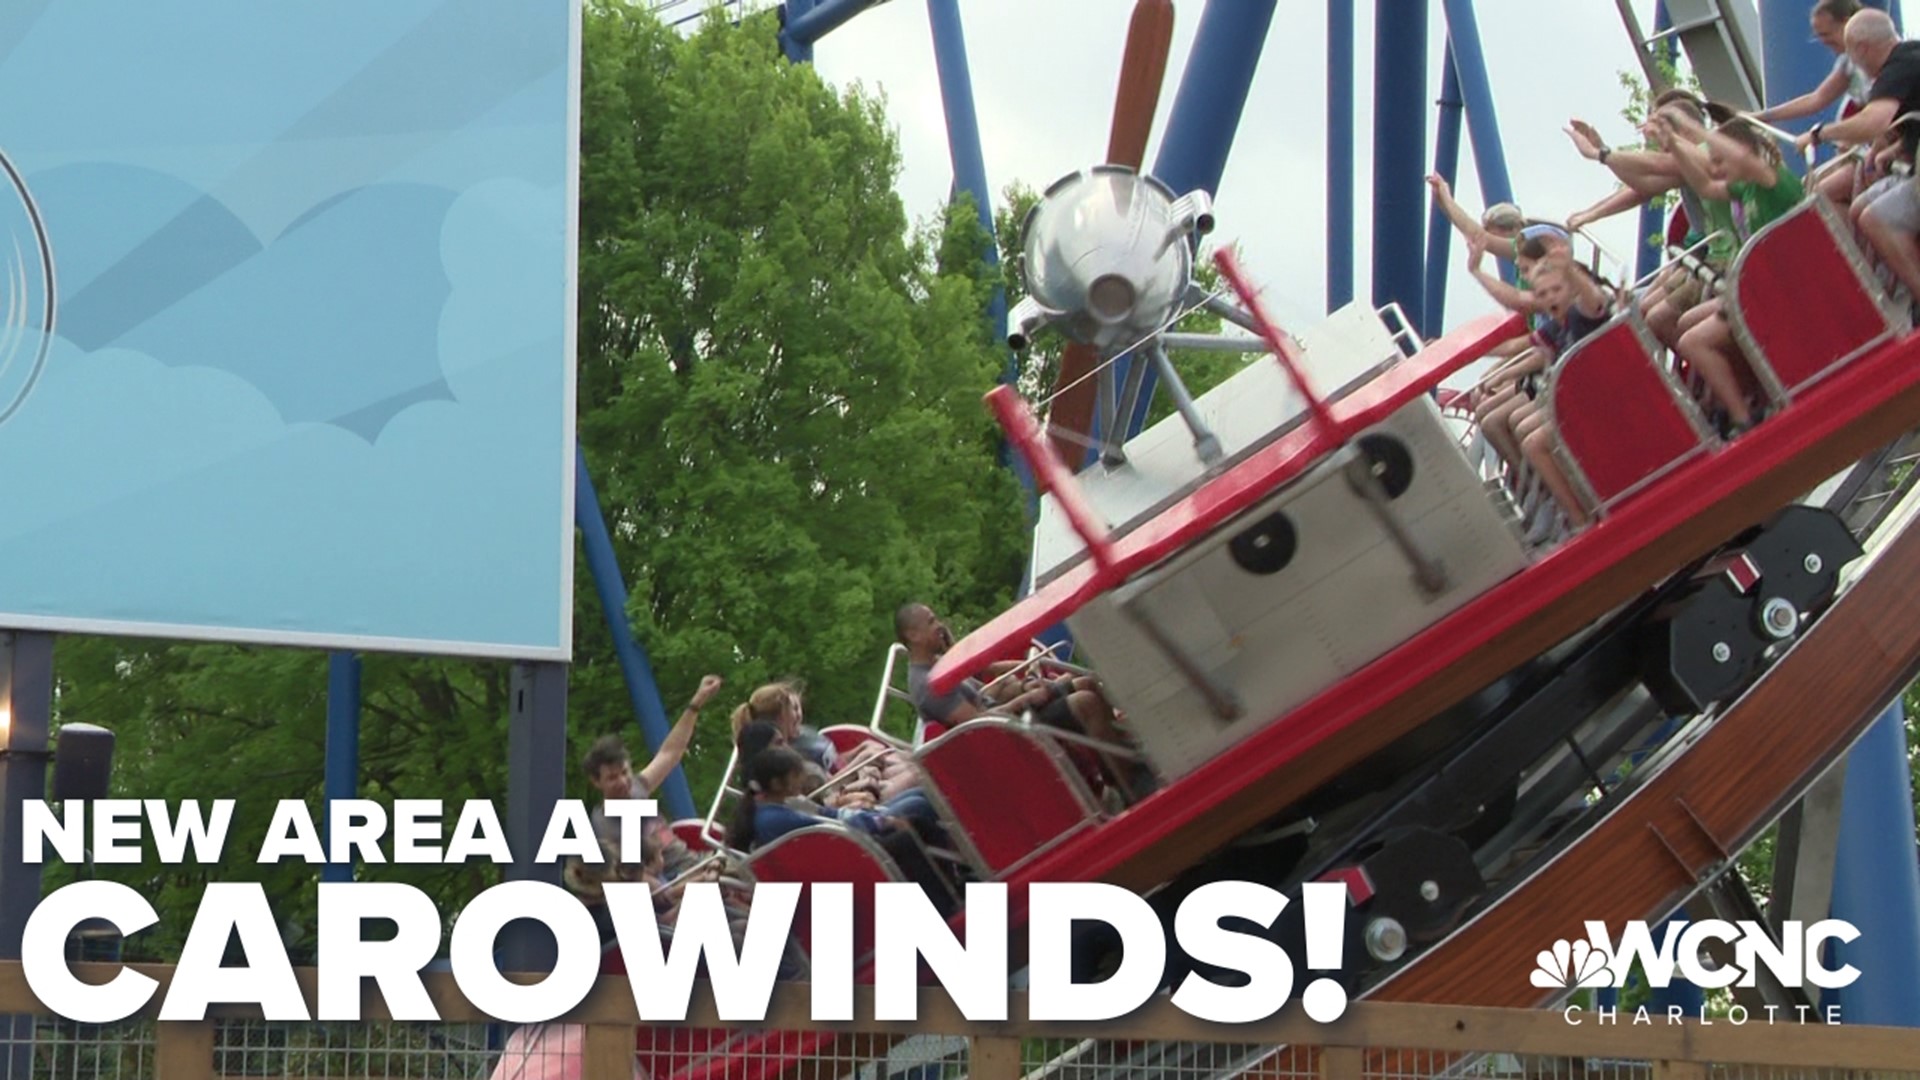 Kia Murray learns how Carowinds hopes this new area soars as the park celebrates its 50th anniversary!